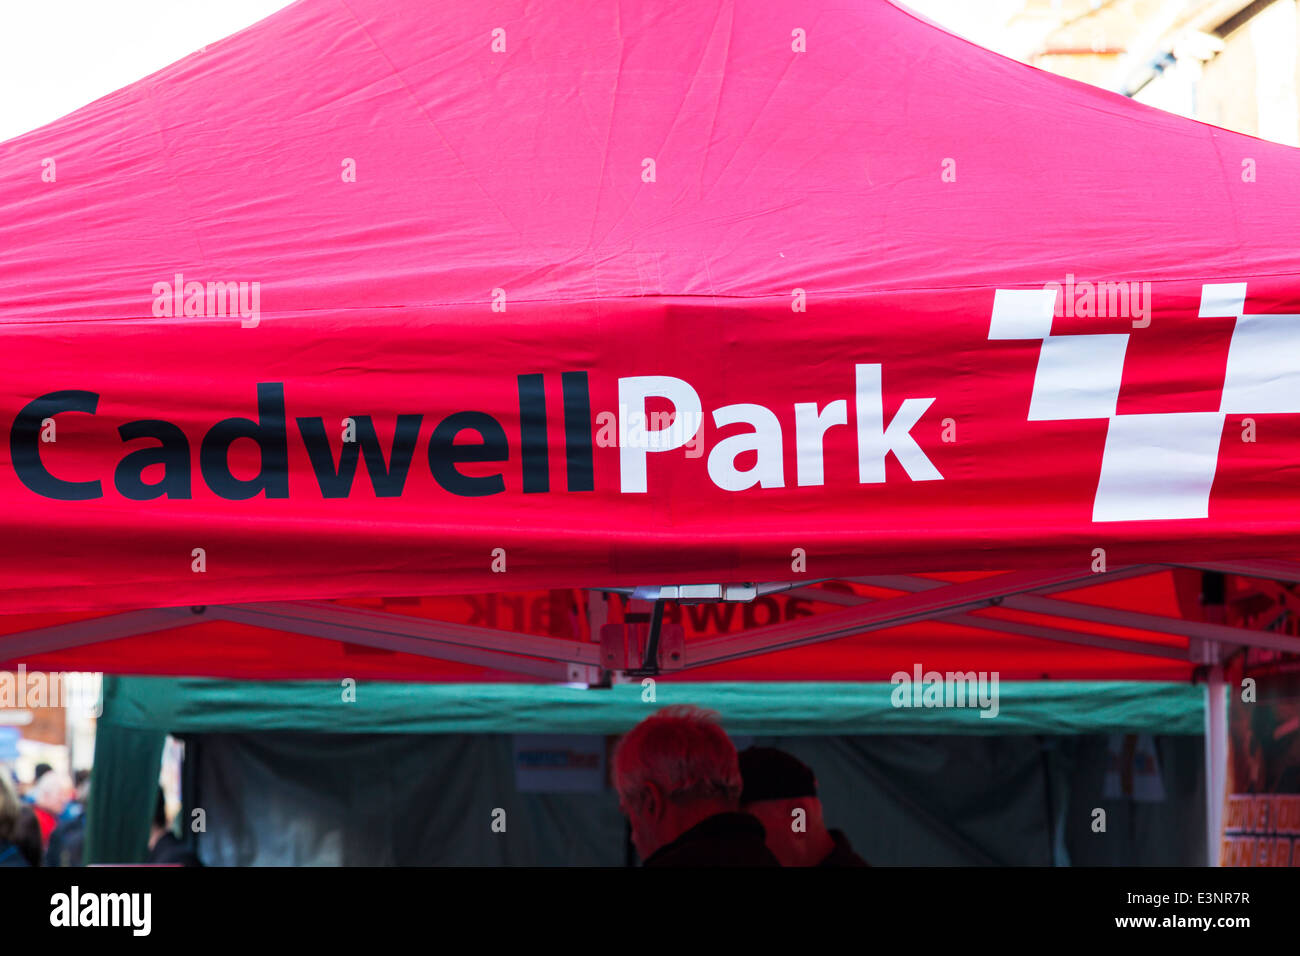 Cadwell park tent sign motorbike racing track Stock Photo